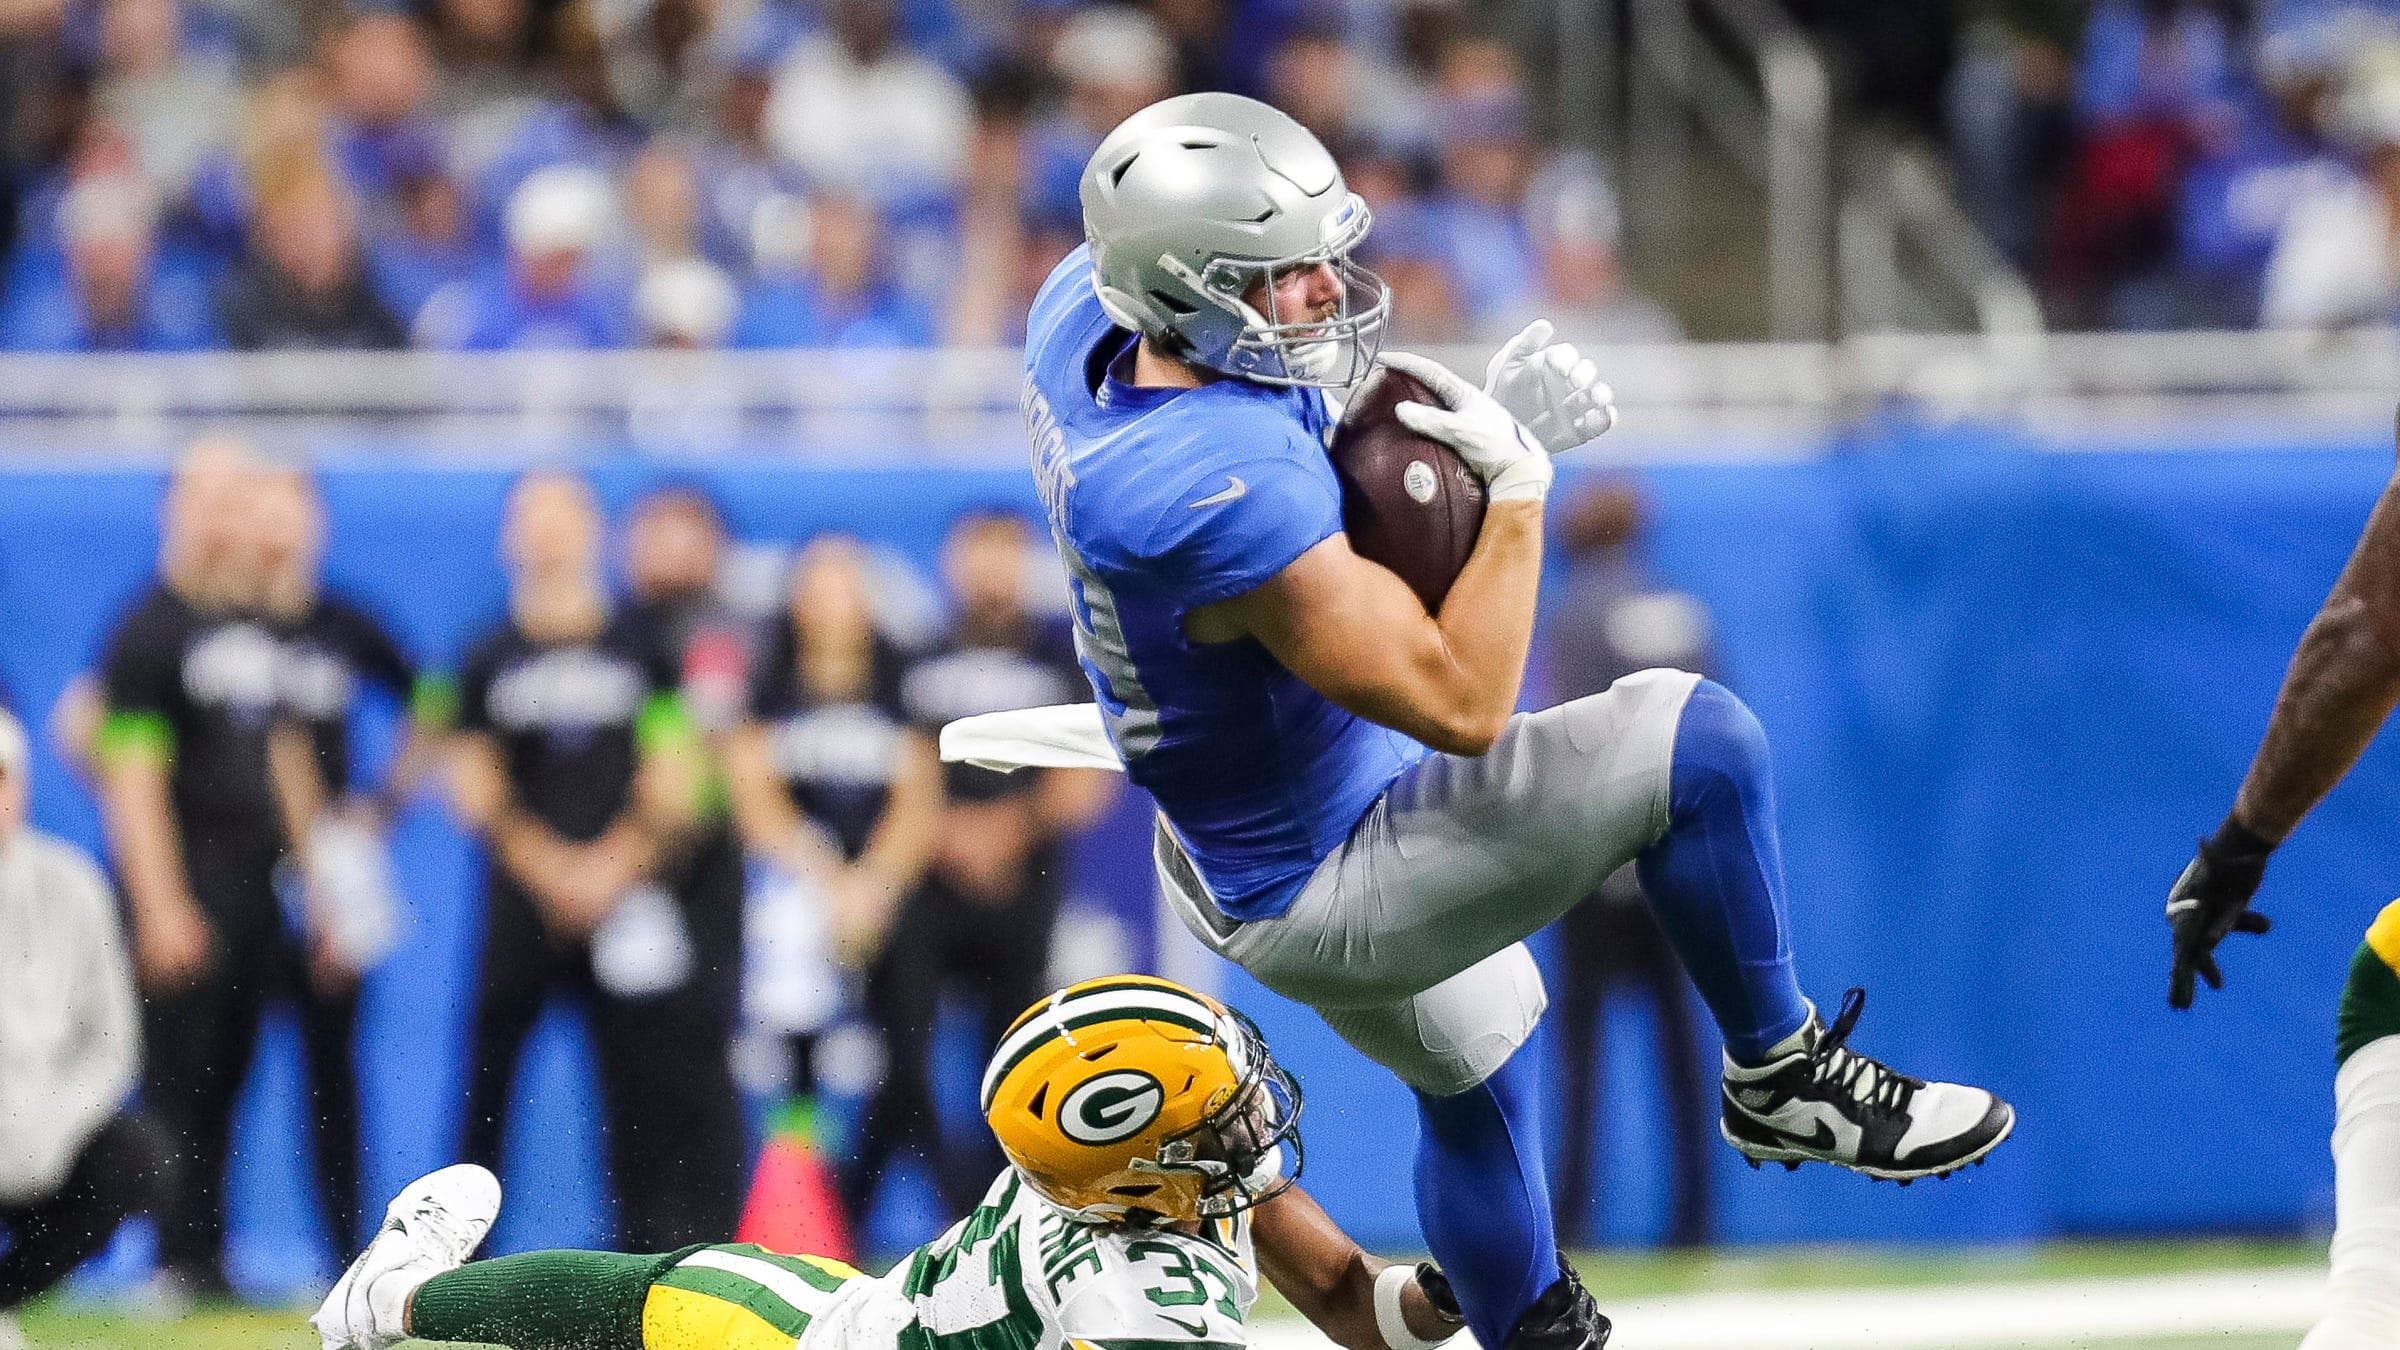 Detroit Lions tight end Brock Wright (89) makes a catch against the Green Bay Packers.